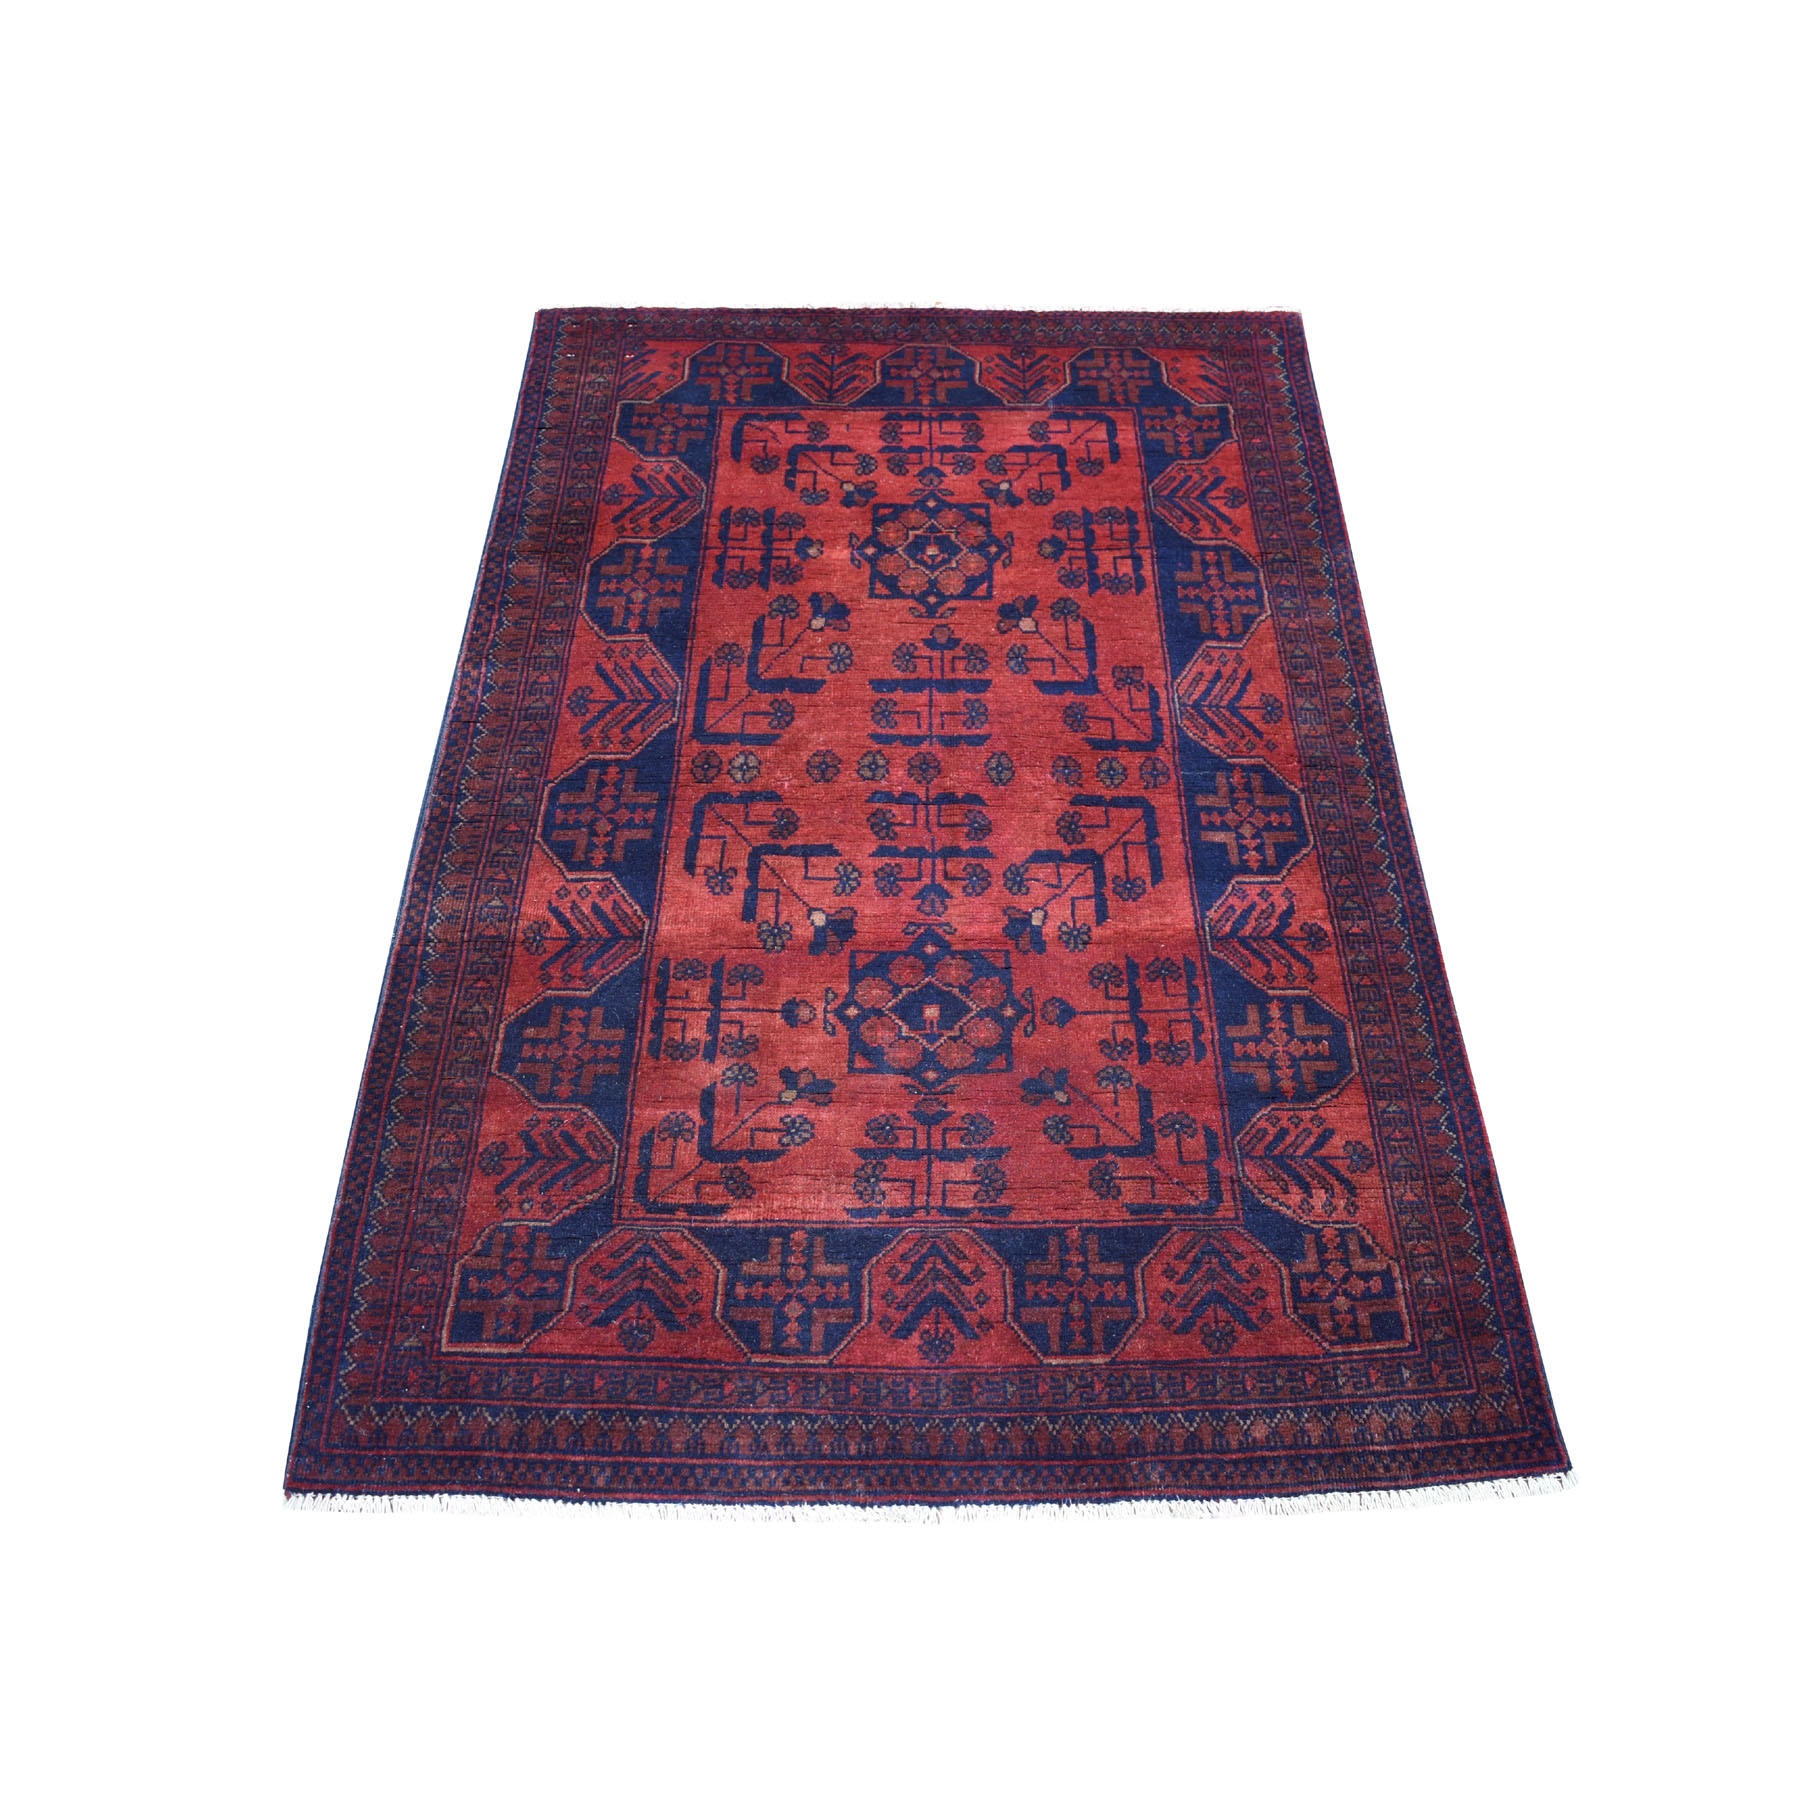 3-3 x5-1  Deep and Saturated Red Geometric Design Afghan Andkhoy Pure Wool Hand-Knotted Oriental Rug 